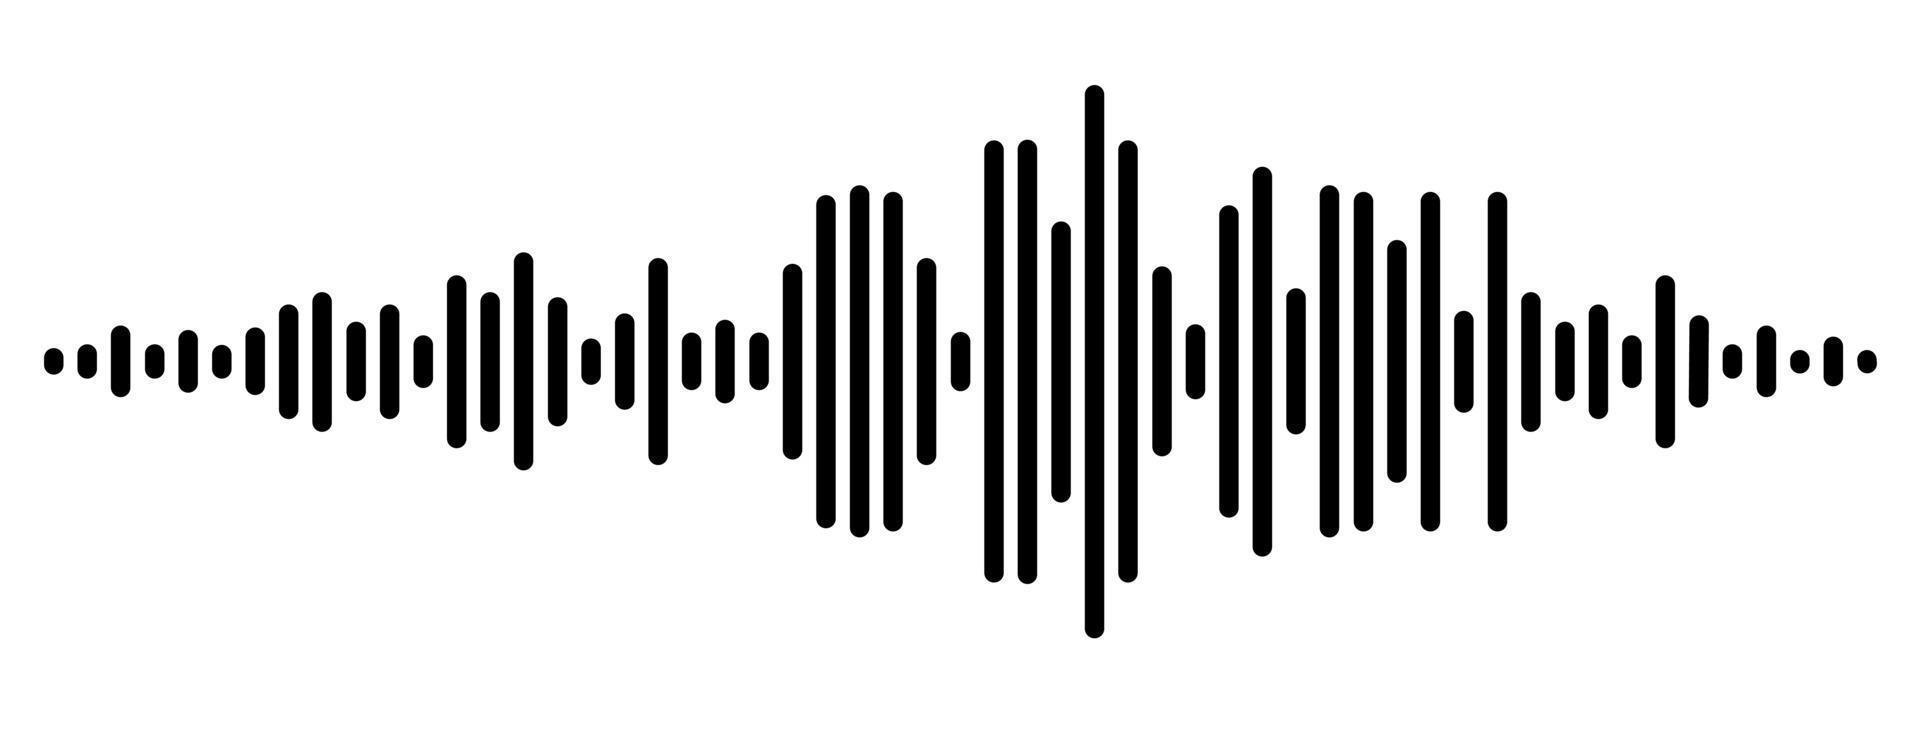 Audio wave sign, seamless sound waveform background, music player, voice, dictaphone vector